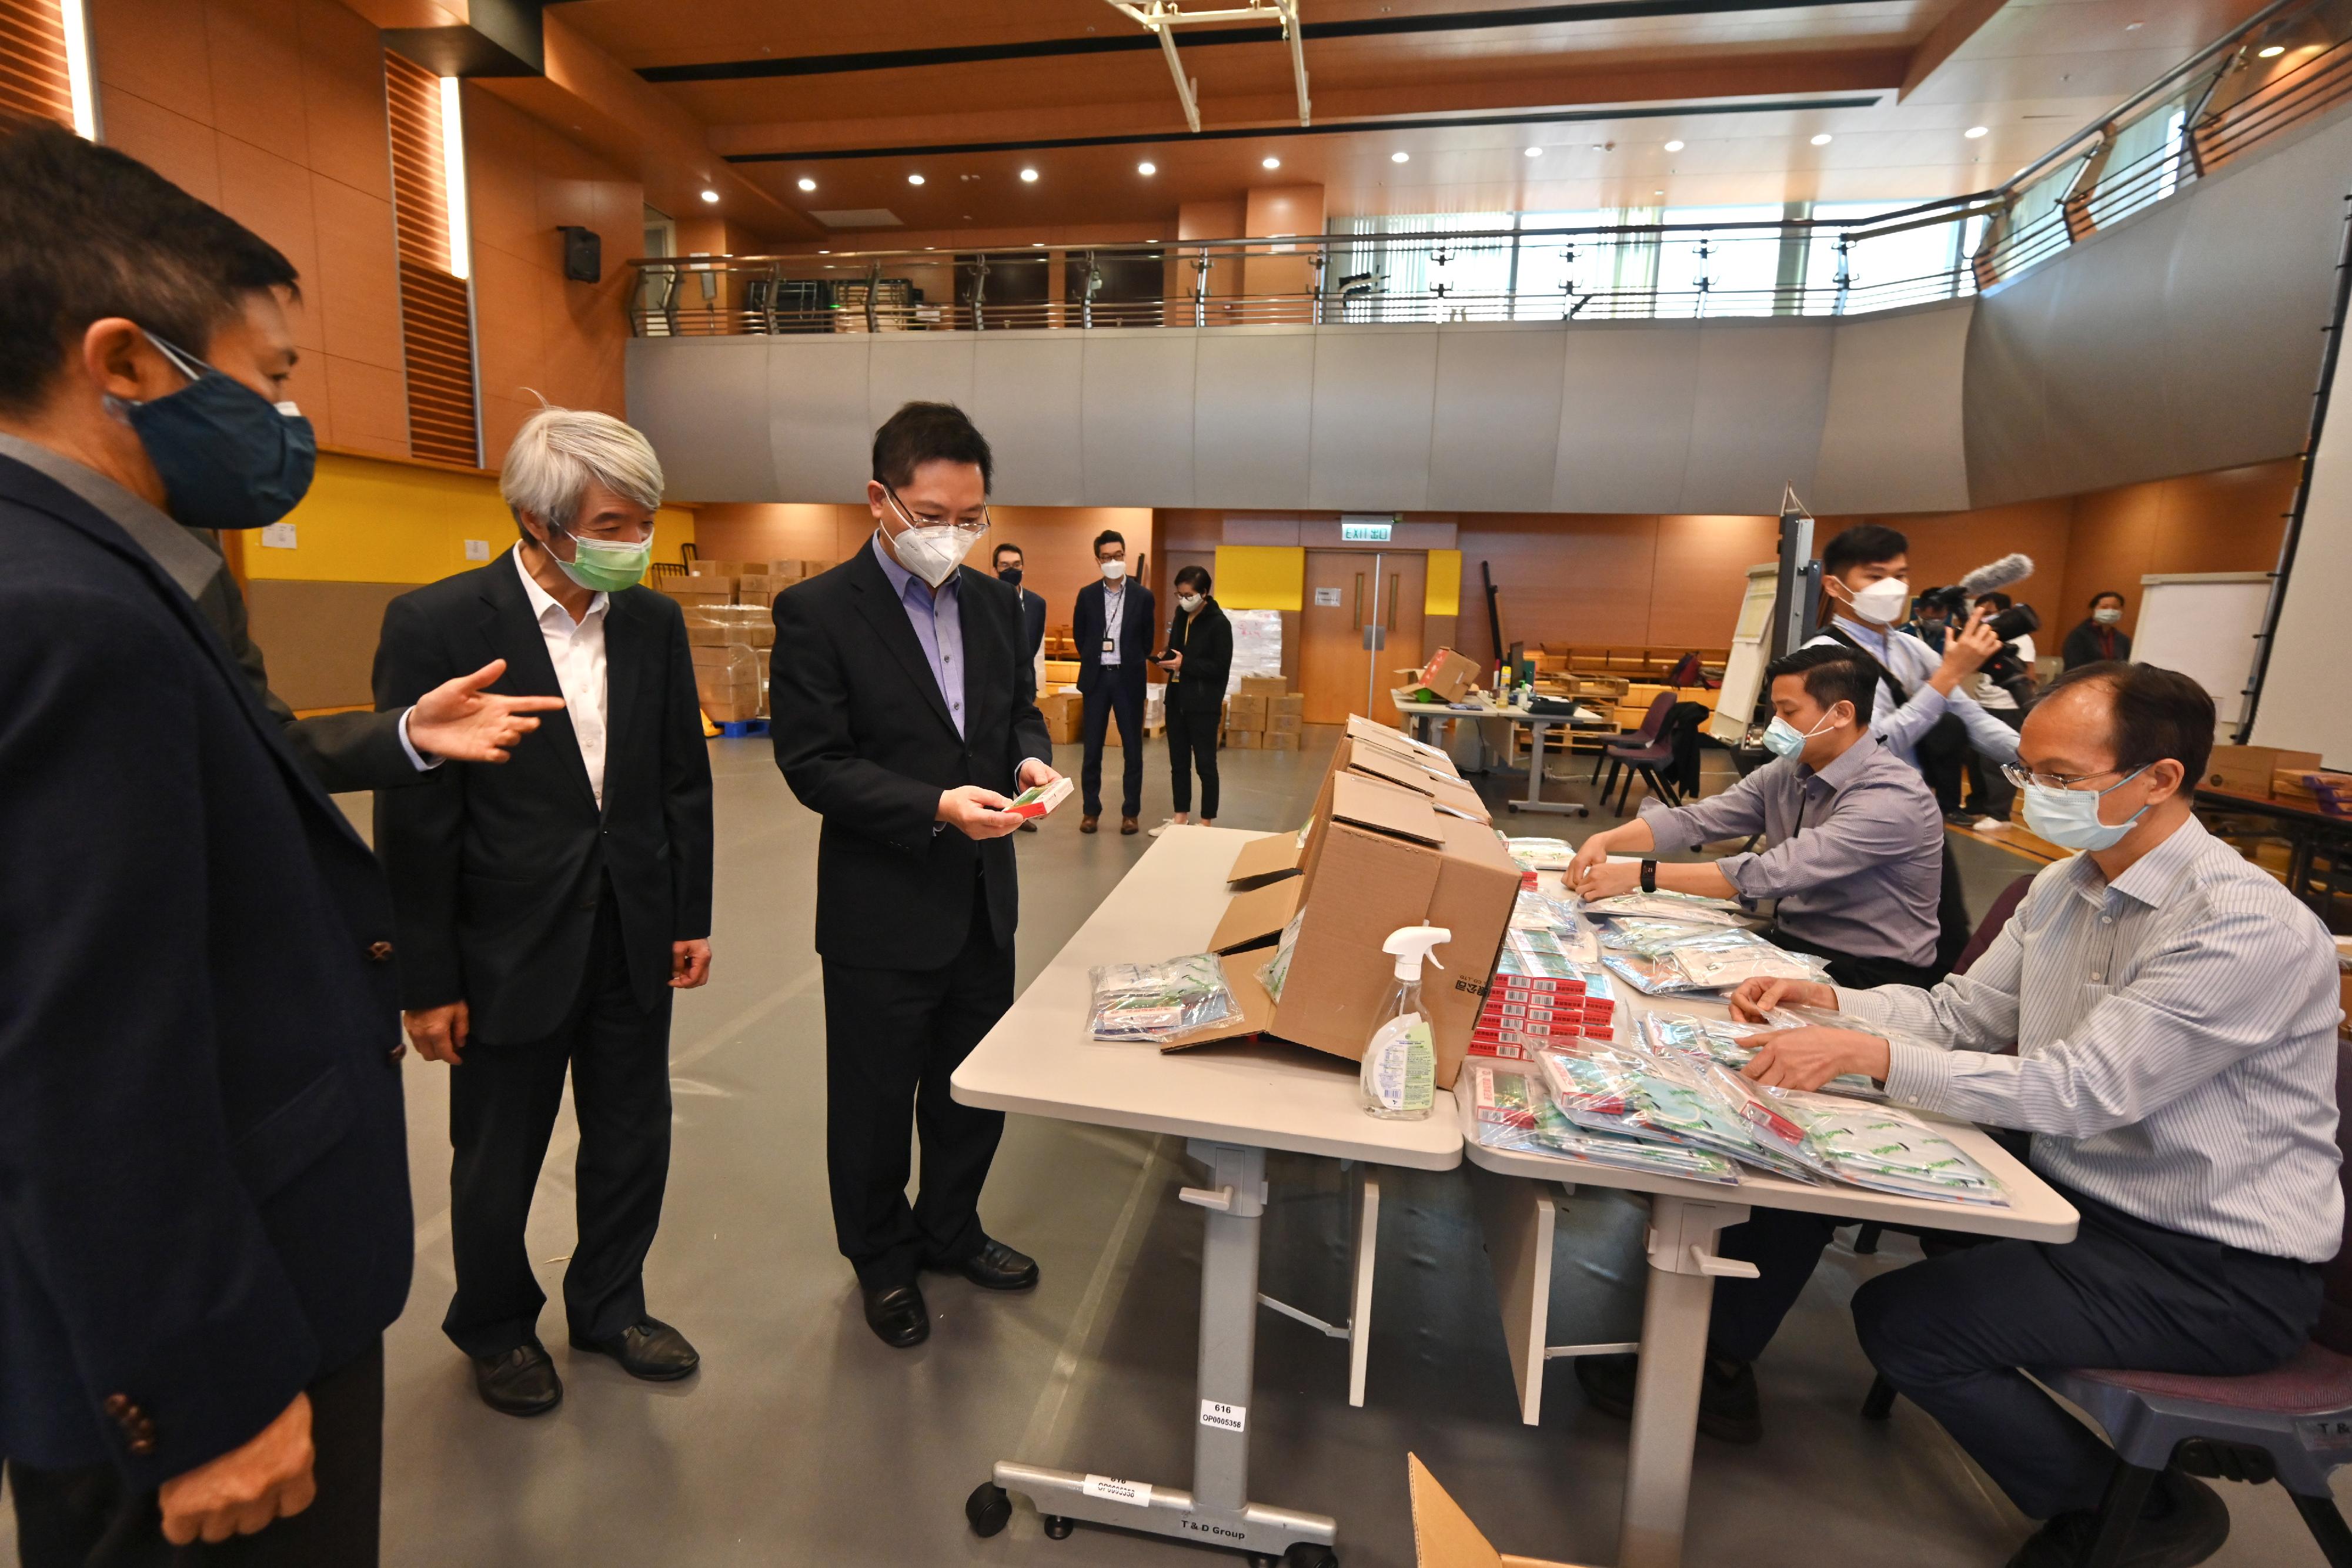 The Secretary for Innovation and Technology, Mr Alfred Sit (third left), inspects the anti-epidemic kit distribution centre located in the Independent Commission Against Corruption (ICAC) today (March 10) and takes a closer look at the anti-epidemic proprietary Chinese medicine "Lianhua Qingwen Jiaonang" to be distributed to confirmed patients. Looking on is the ICAC Commissioner, Mr Simon Peh (first left).